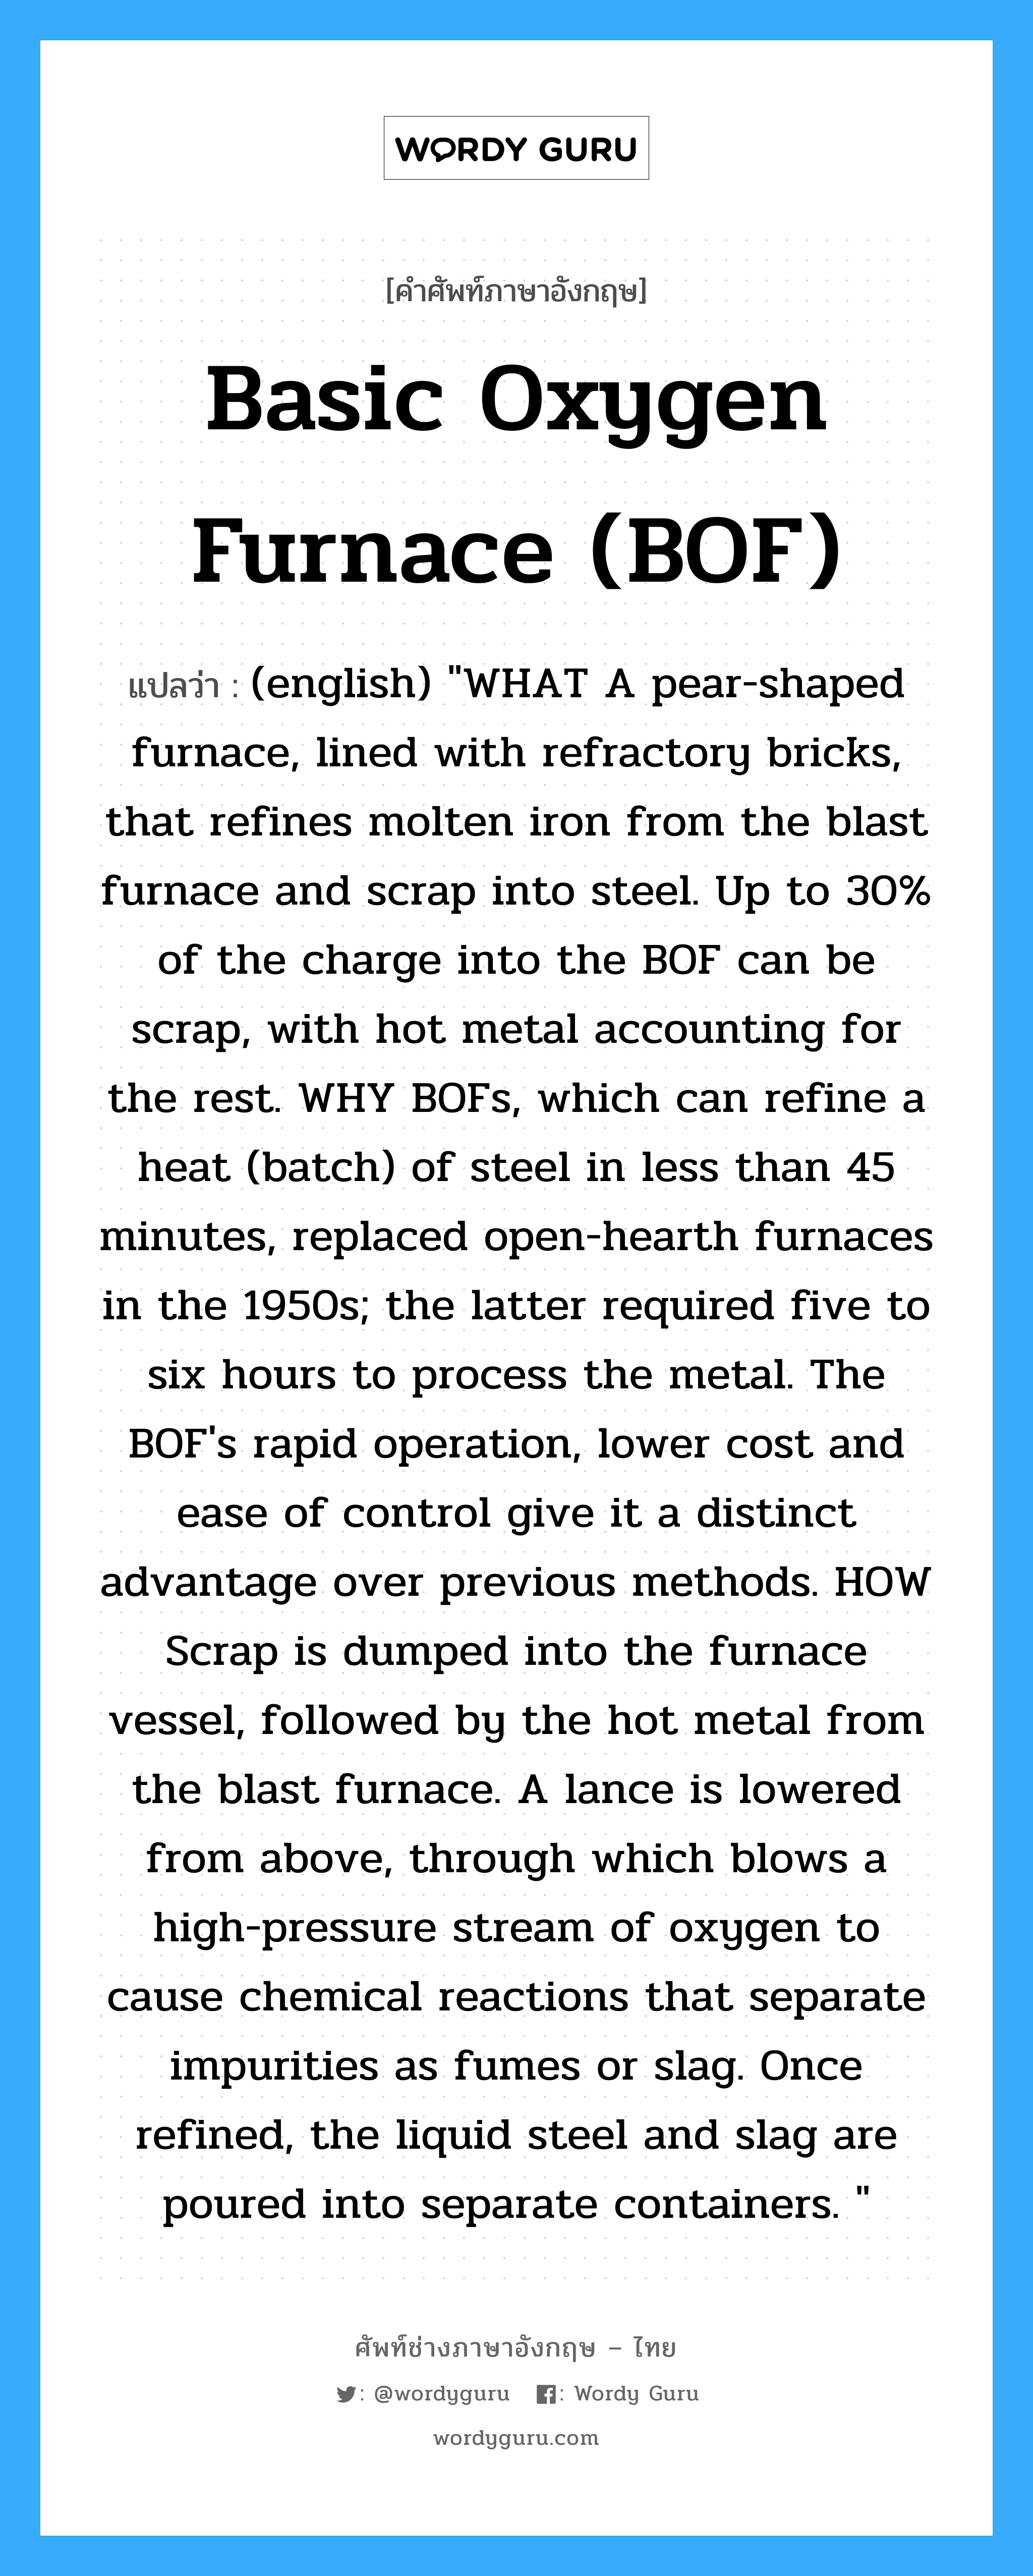 Basic Oxygen Furnace (BOF) แปลว่า?, คำศัพท์ช่างภาษาอังกฤษ - ไทย Basic Oxygen Furnace (BOF) คำศัพท์ภาษาอังกฤษ Basic Oxygen Furnace (BOF) แปลว่า (english) "WHAT A pear-shaped furnace, lined with refractory bricks, that refines molten iron from the blast furnace and scrap into steel. Up to 30% of the charge into the BOF can be scrap, with hot metal accounting for the rest. WHY BOFs, which can refine a heat (batch) of steel in less than 45 minutes, replaced open-hearth furnaces in the 1950s; the latter required five to six hours to process the metal. The BOF's rapid operation, lower cost and ease of control give it a distinct advantage over previous methods. HOW Scrap is dumped into the furnace vessel, followed by the hot metal from the blast furnace. A lance is lowered from above, through which blows a high-pressure stream of oxygen to cause chemical reactions that separate impurities as fumes or slag. Once refined, the liquid steel and slag are poured into separate containers. "